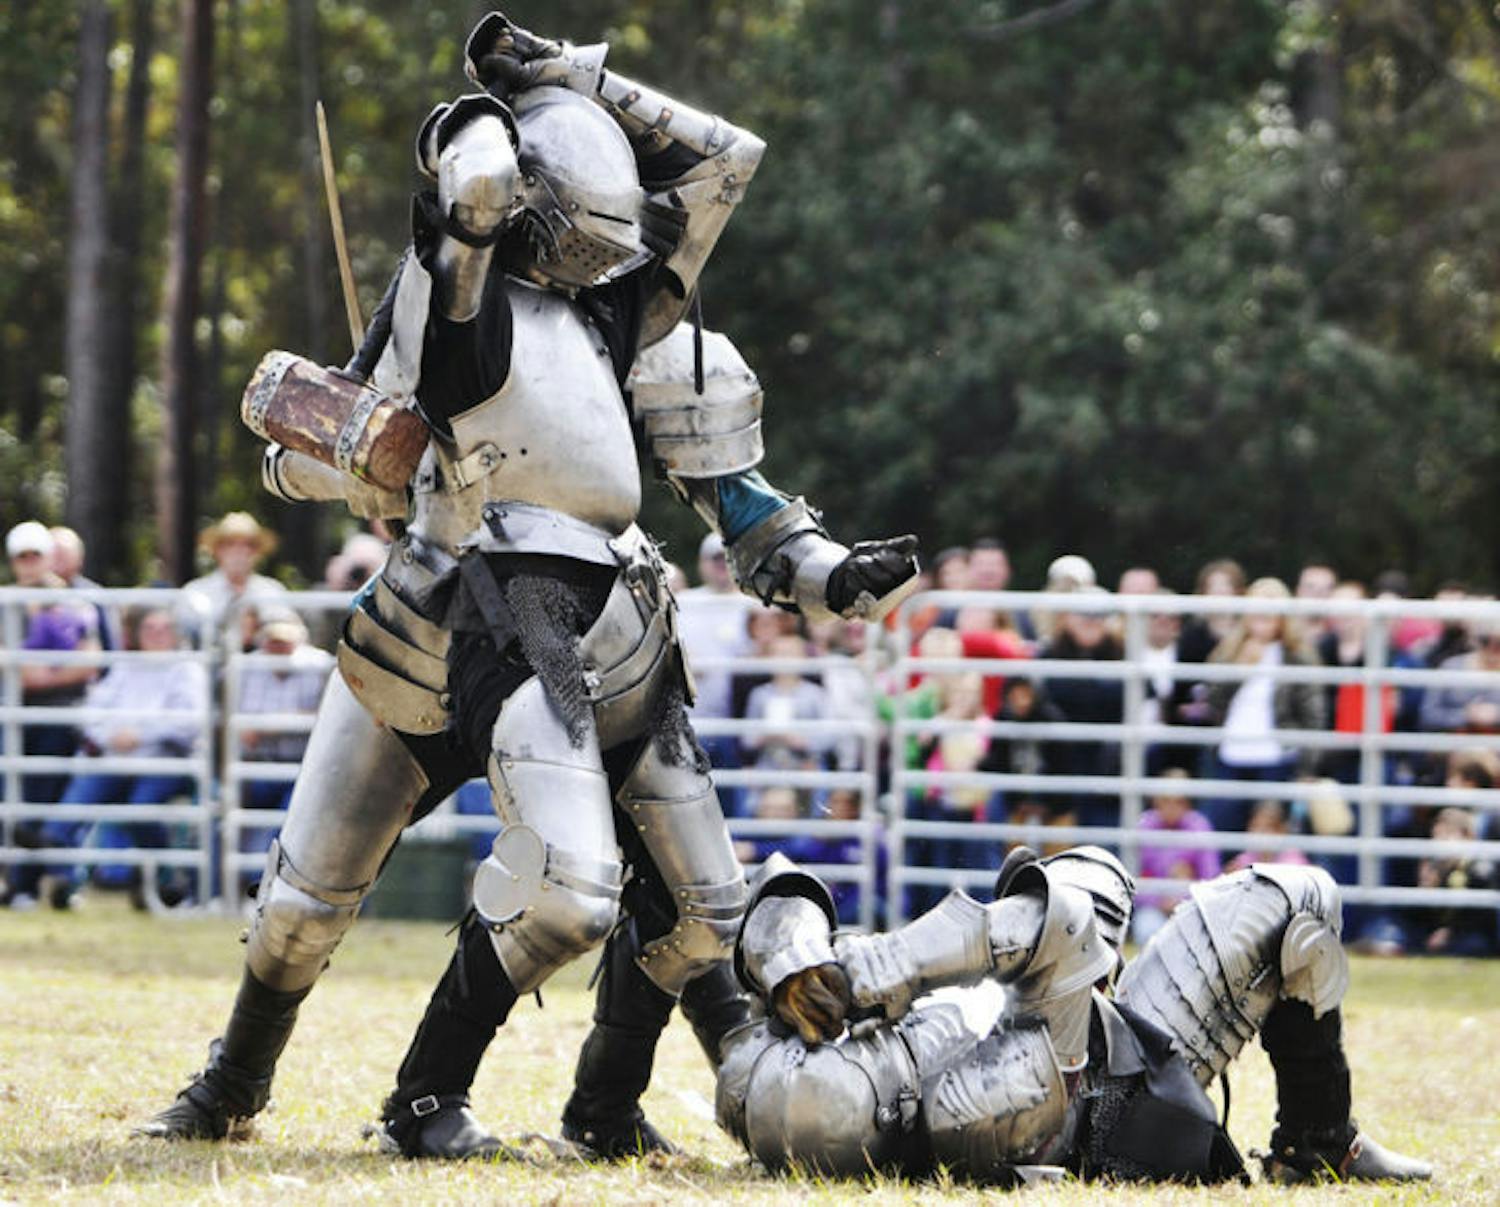 Knights engage during battle at the Hoggetowne Medieval Faire on Sunday. The festivities will continue this weekend at the Alachua County Fairgrounds.